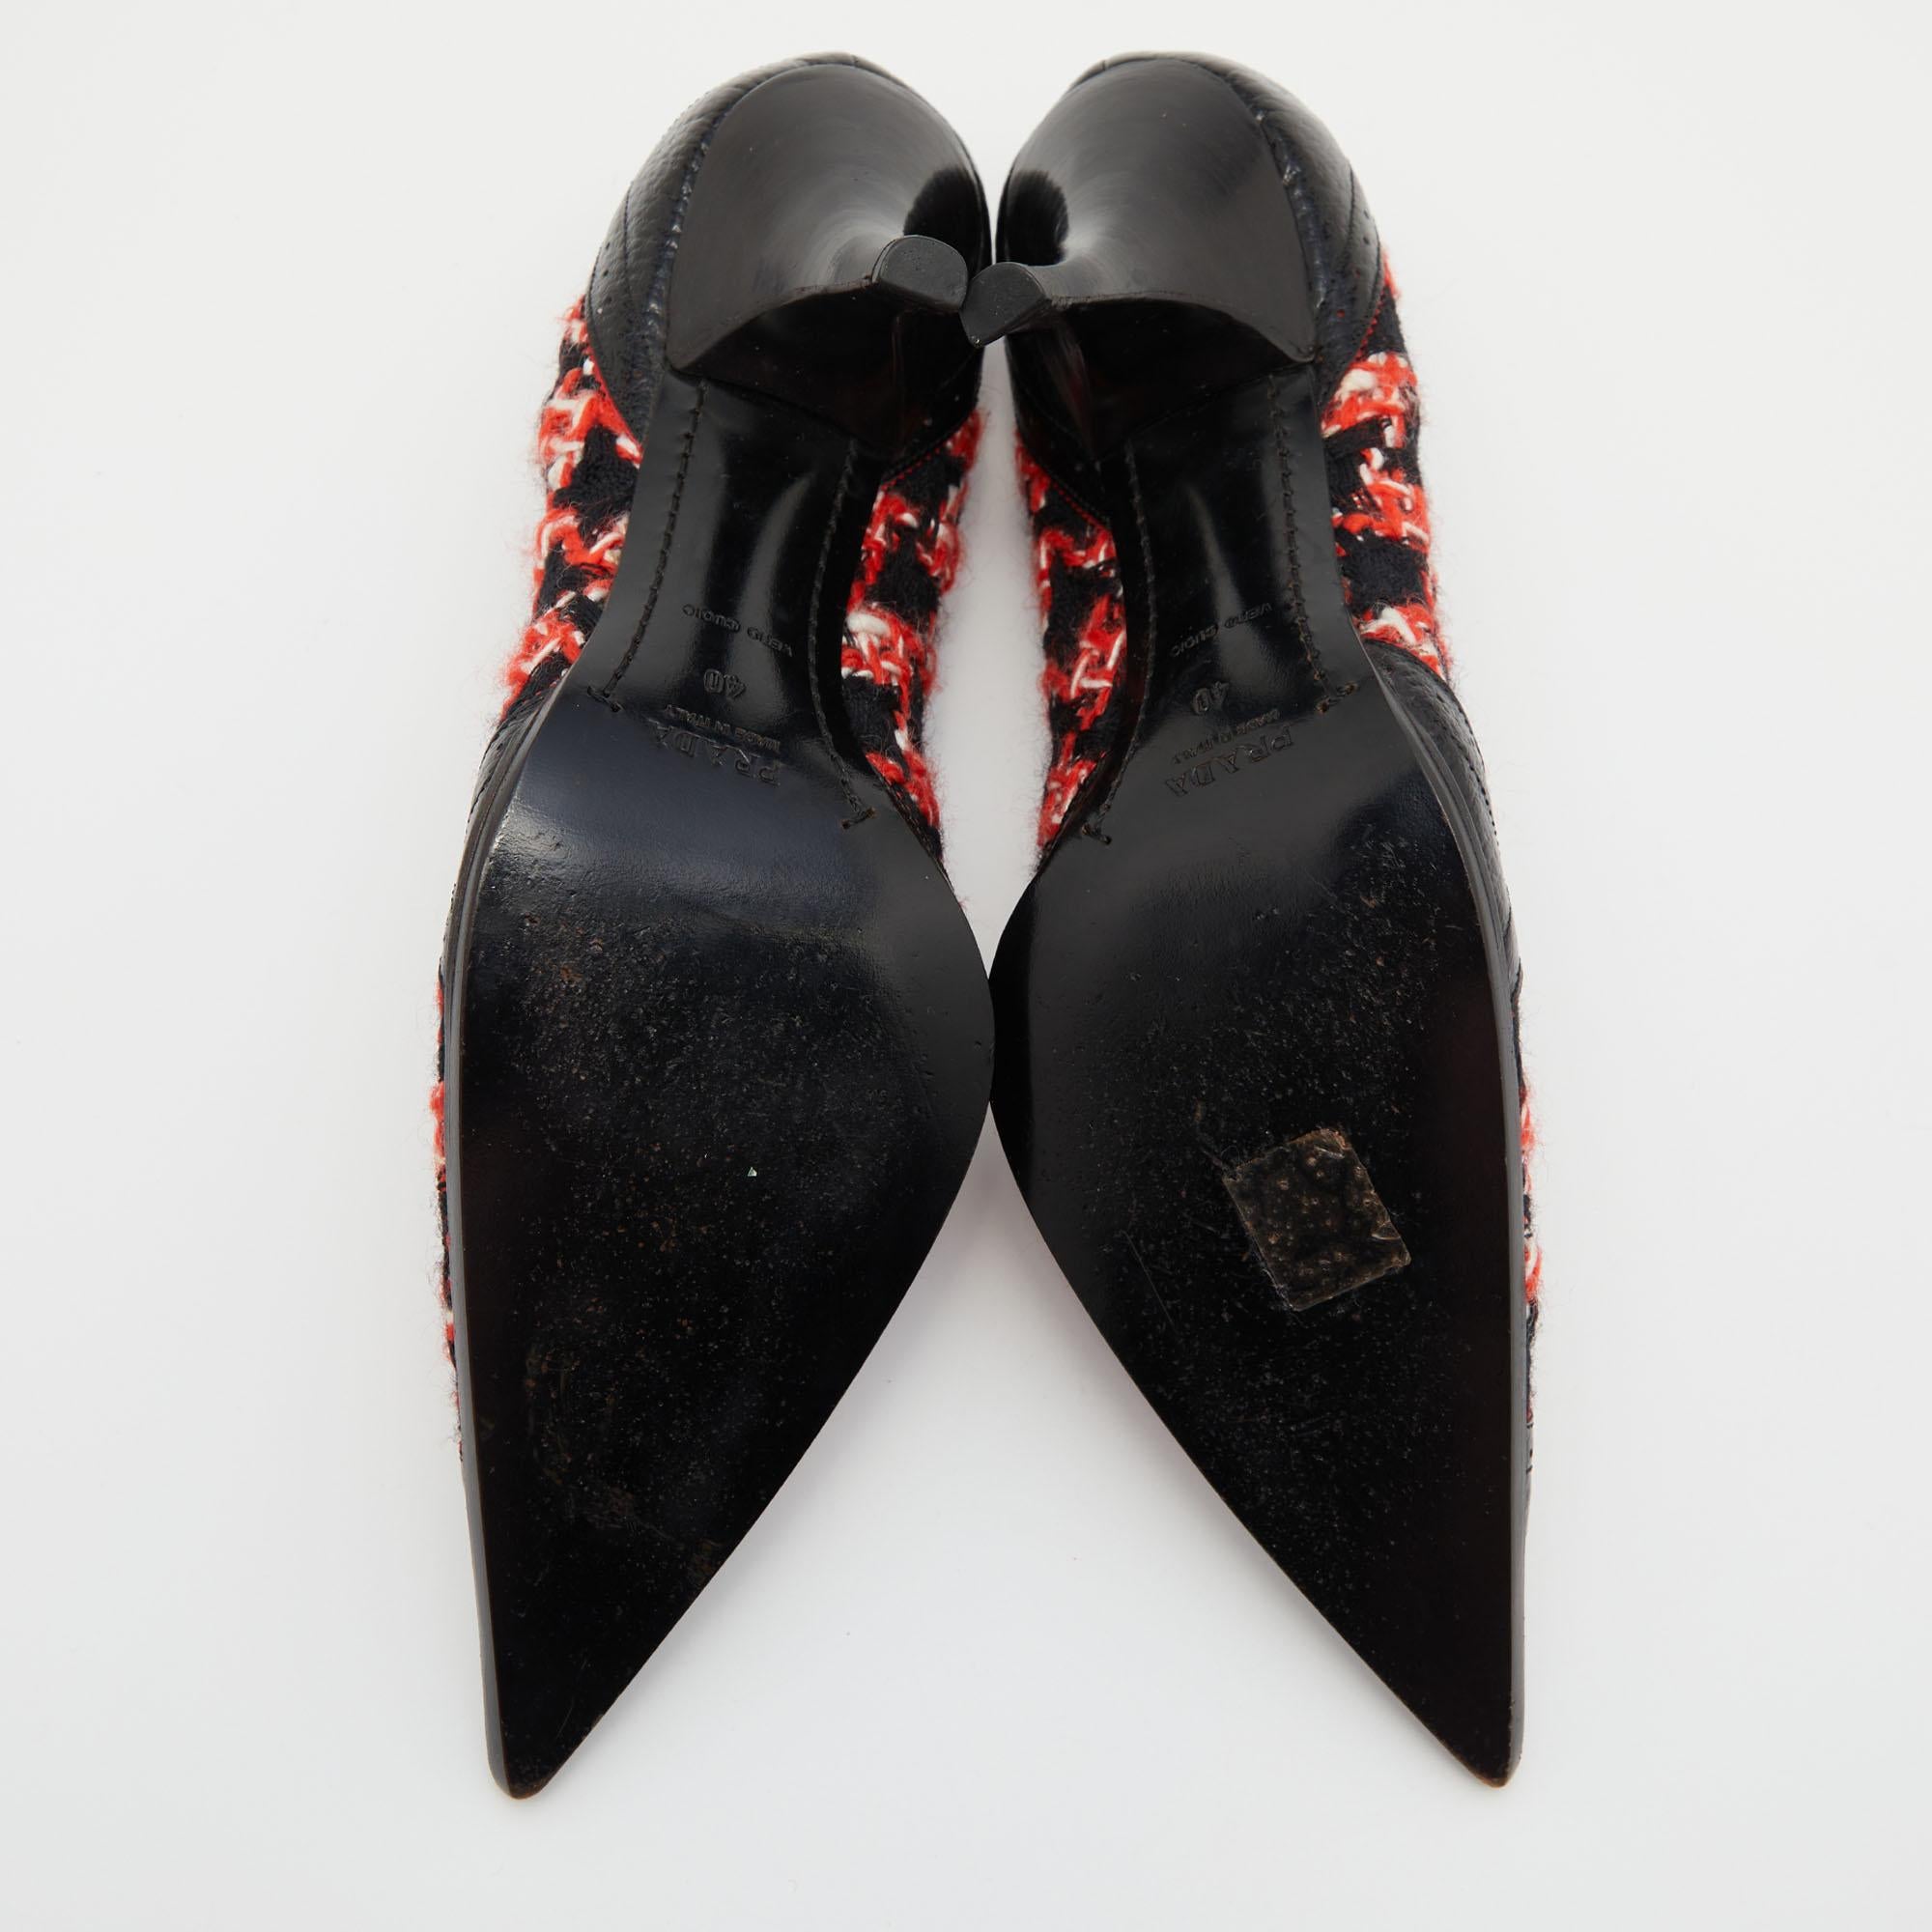 Prada Black/Red Tweed and Leather Pointed Toe Bow Detail Pumps 40 4